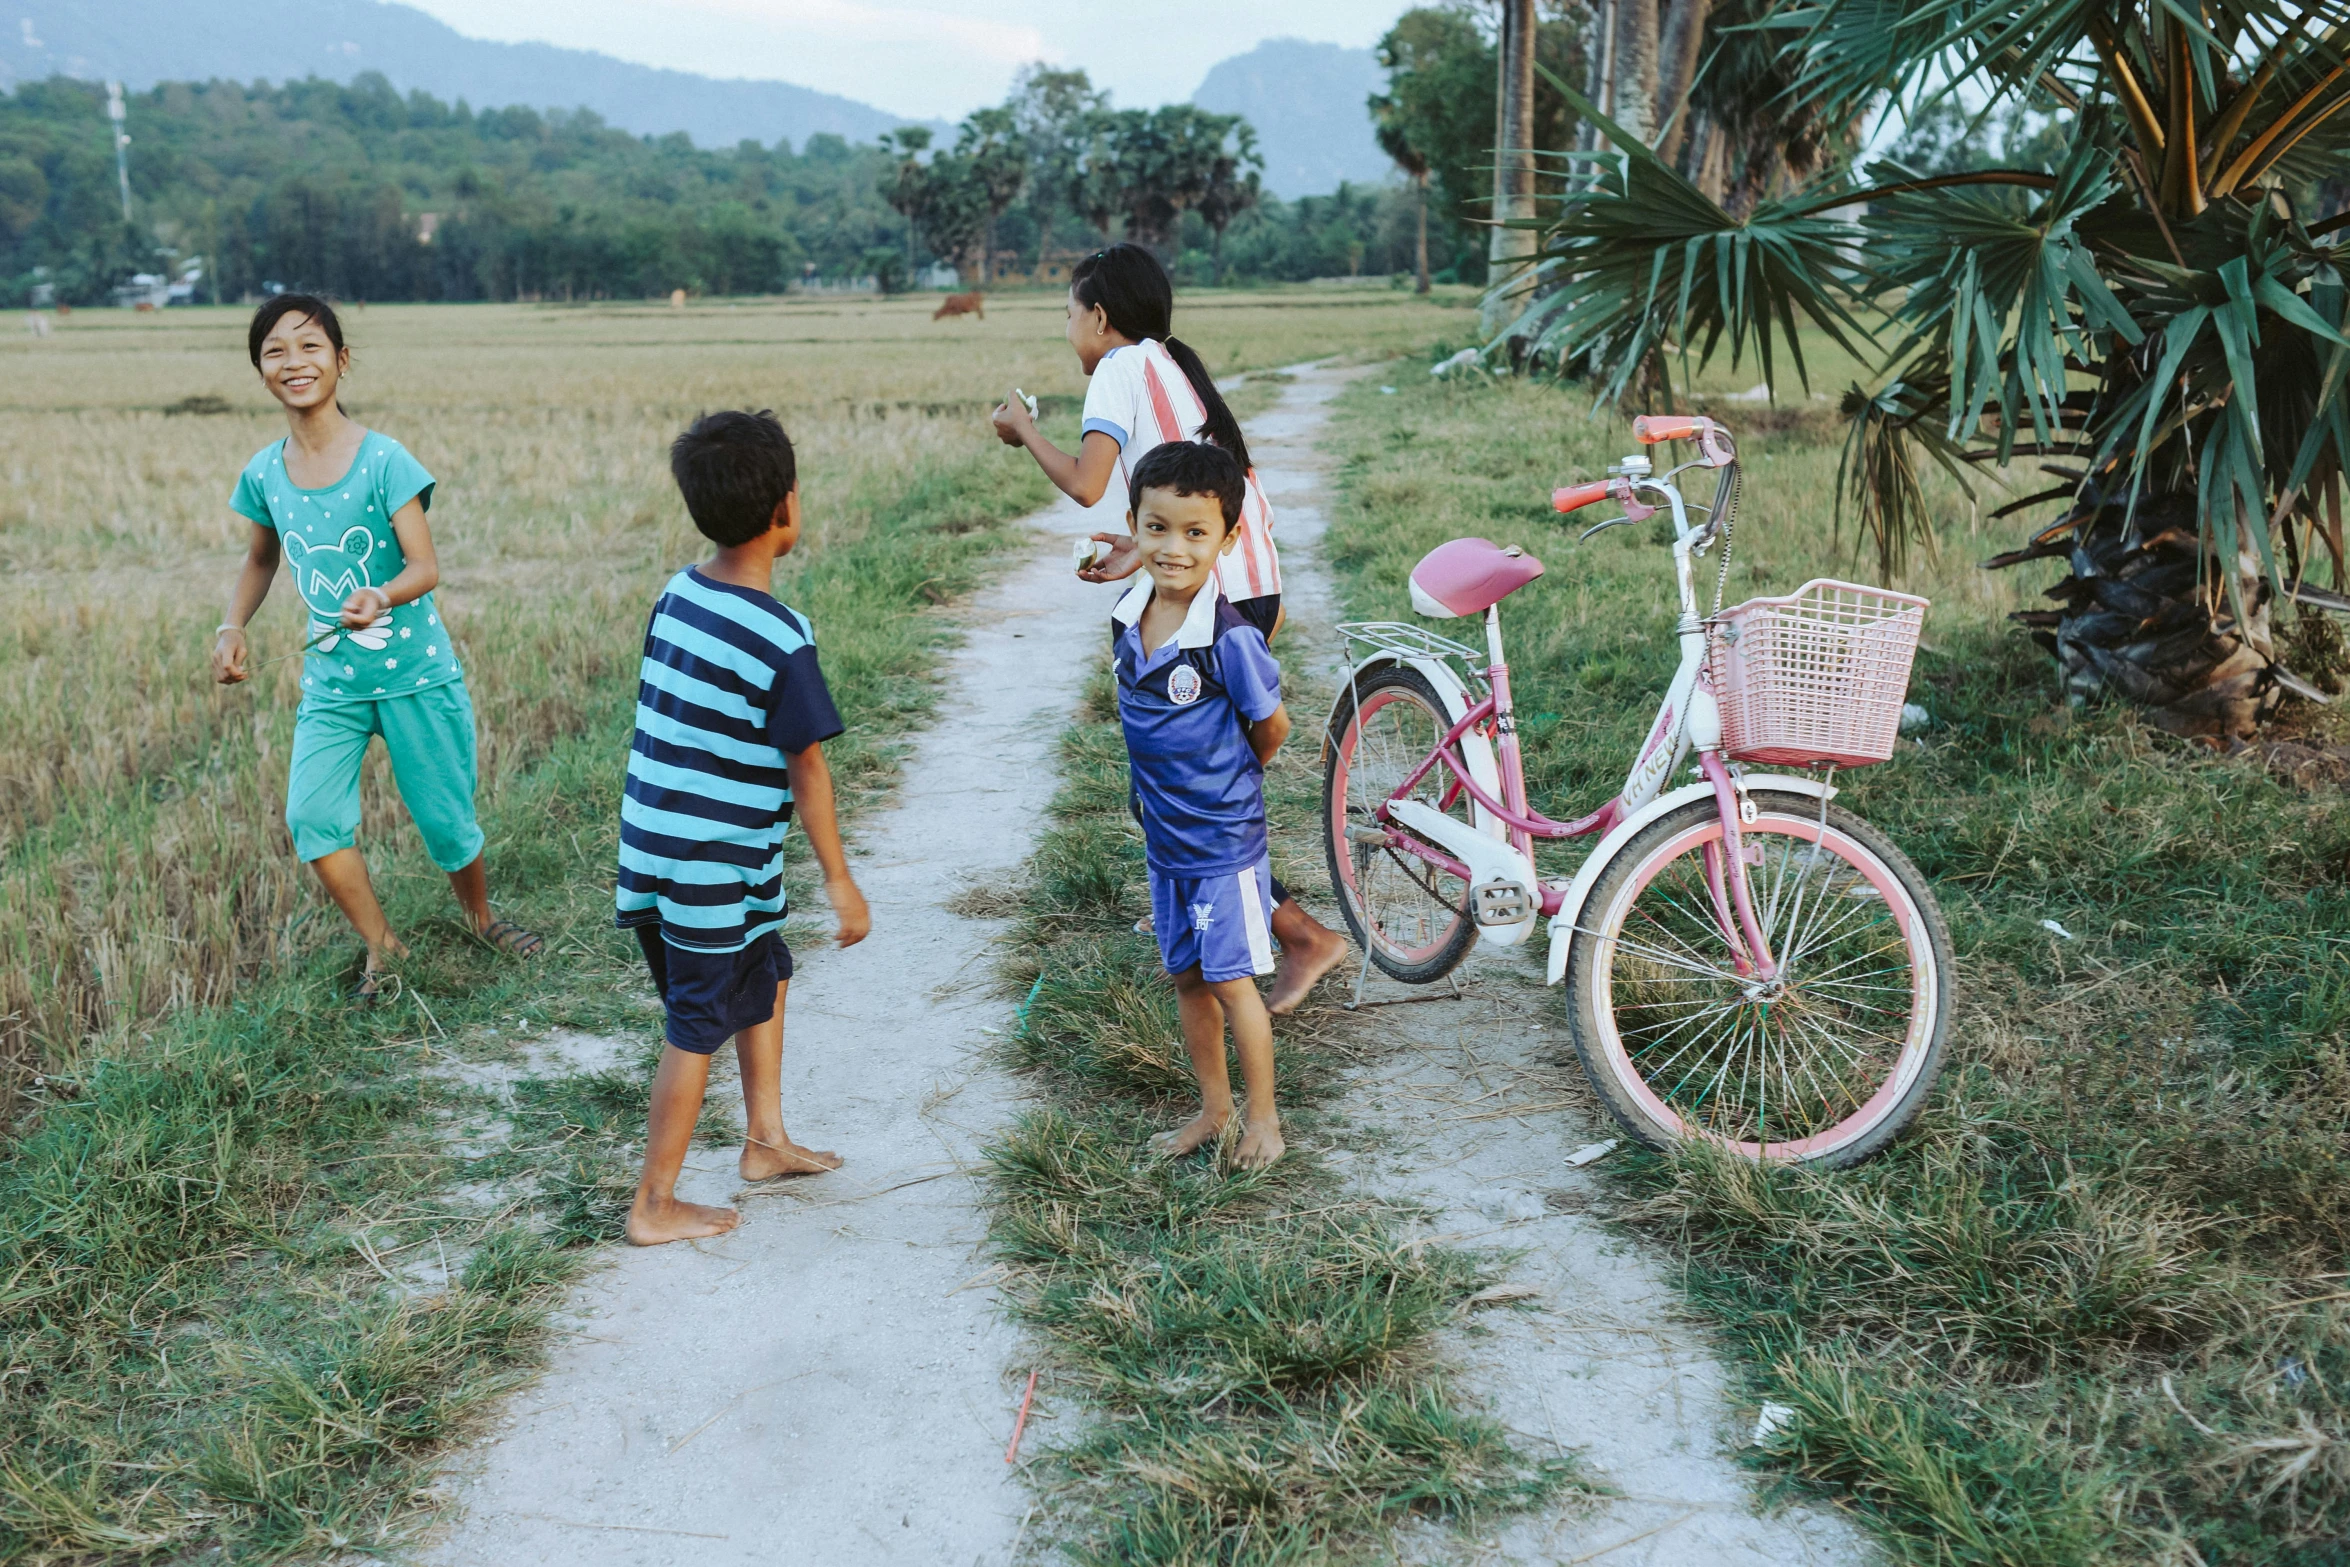 children are playing with their bikes on the side of a dirt road